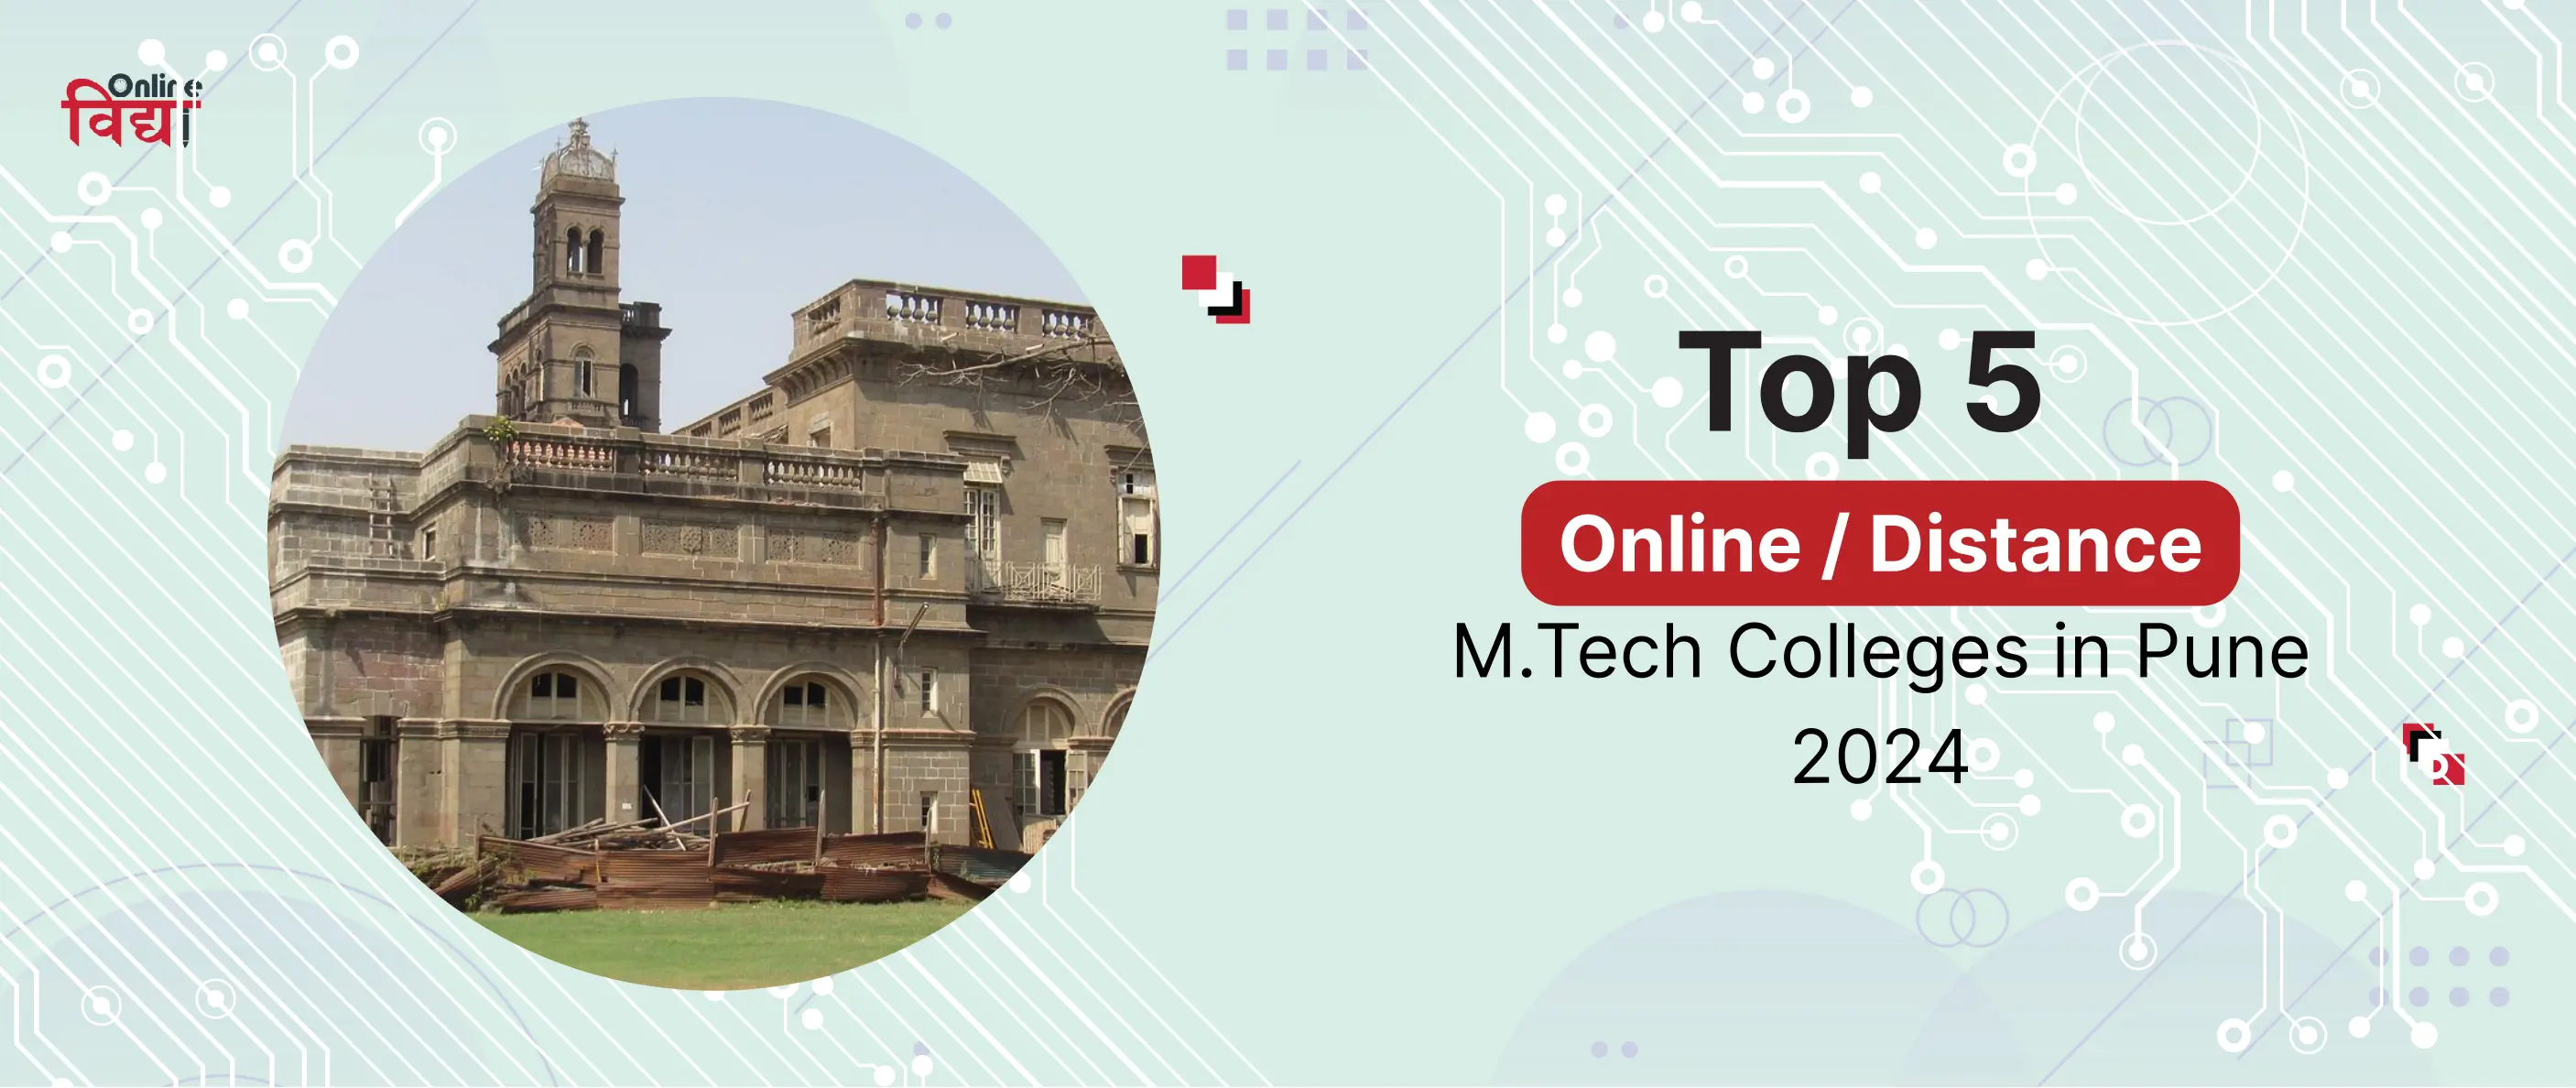 Top 5 Online/ Distance M.Tech Colleges in Pune 2024